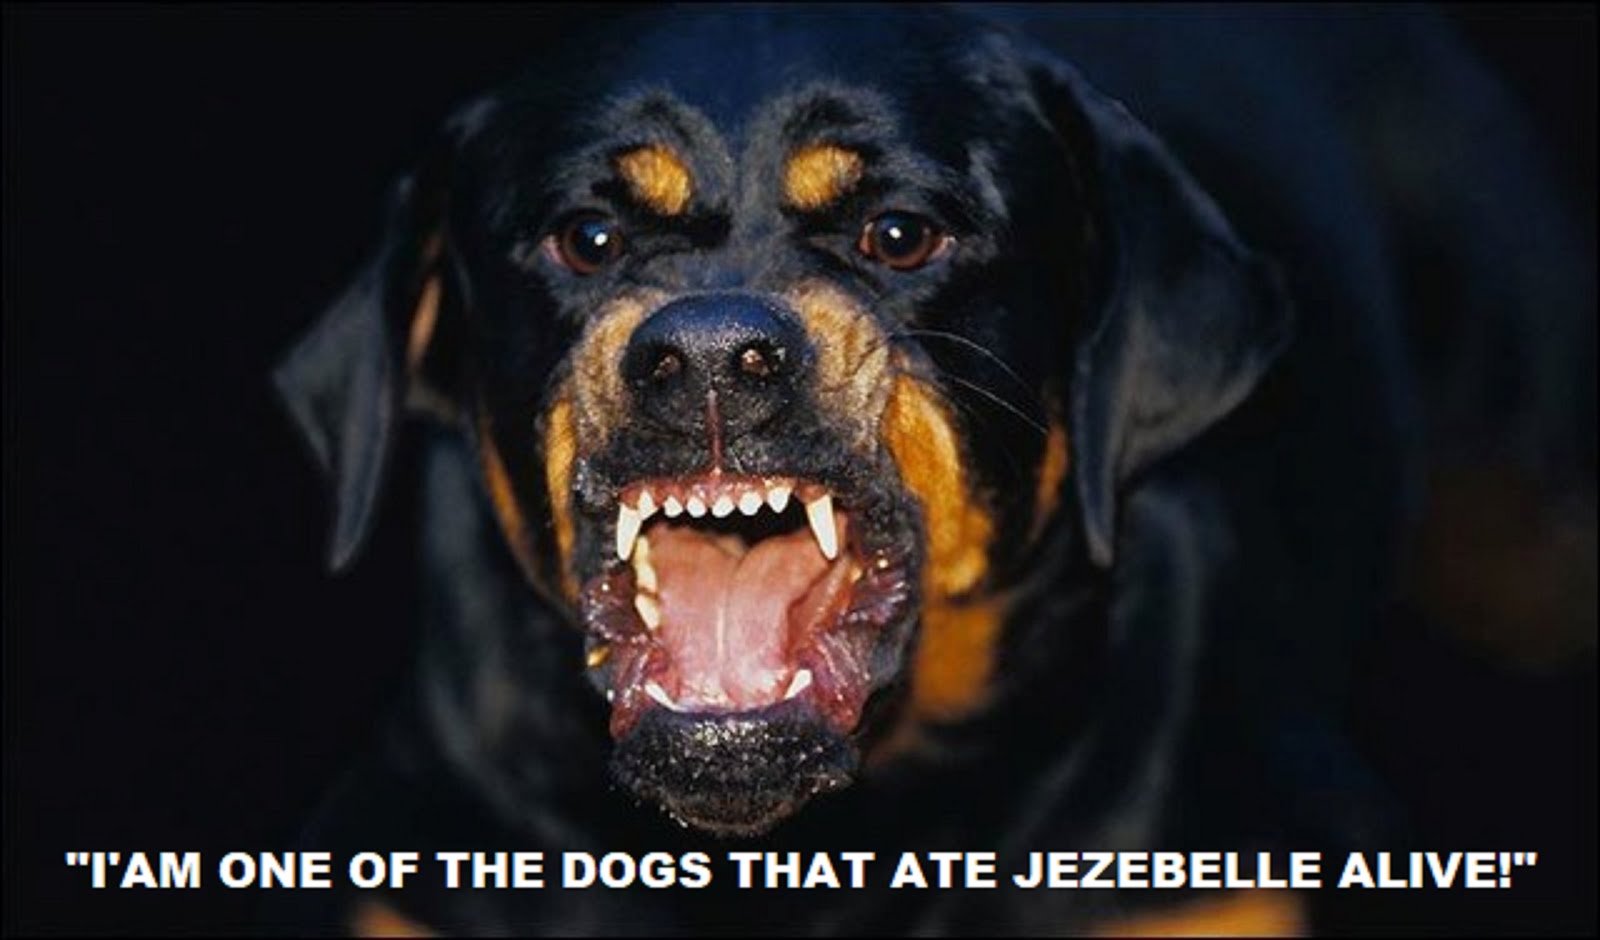 I'AM ONE OF THE DOGS THAT ATE JEZEBELLE ALIVE!